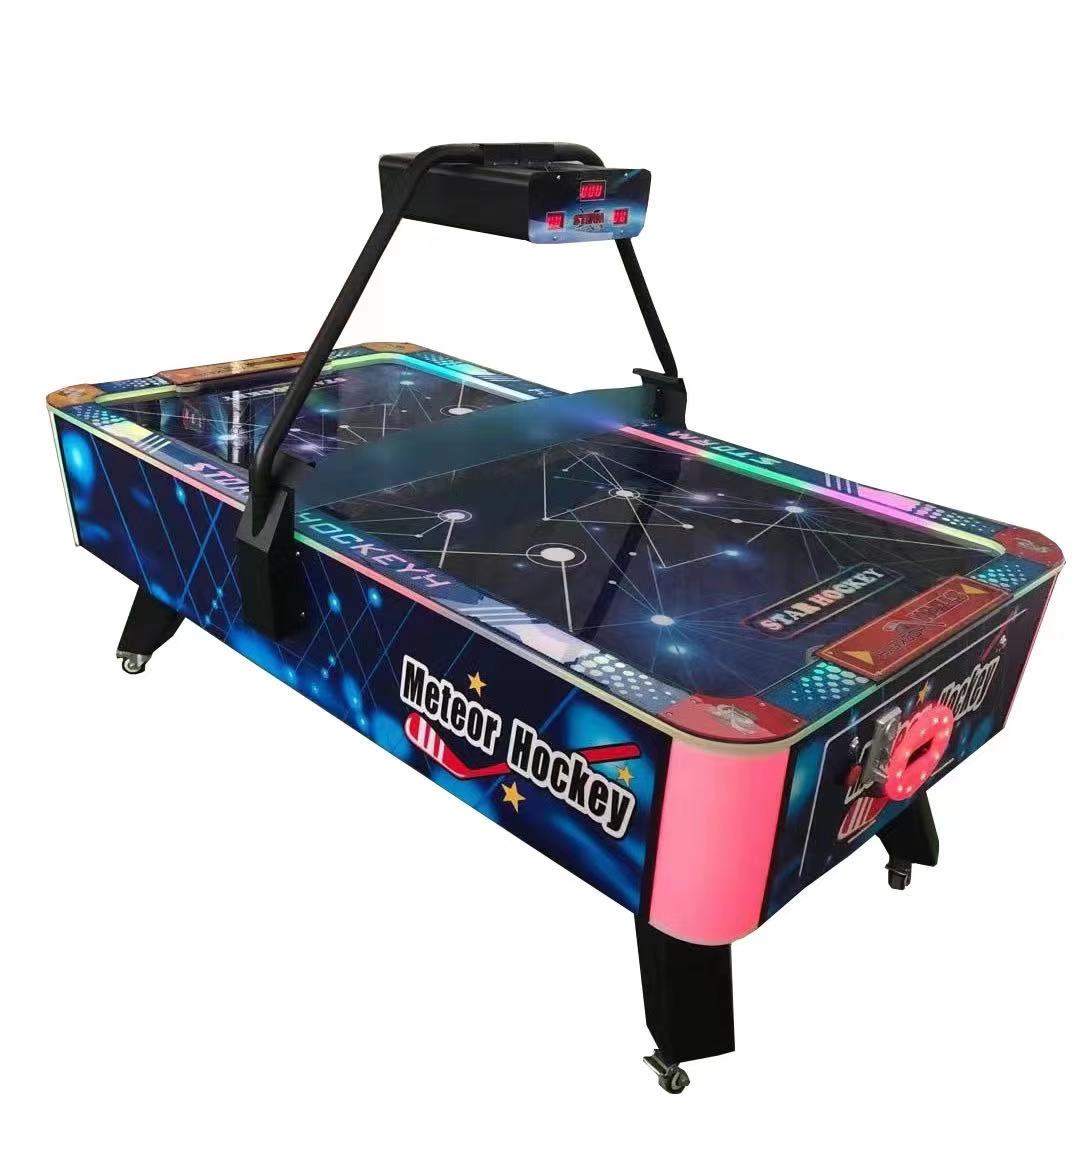 How to Play Better With an Air Hockey Game Machine